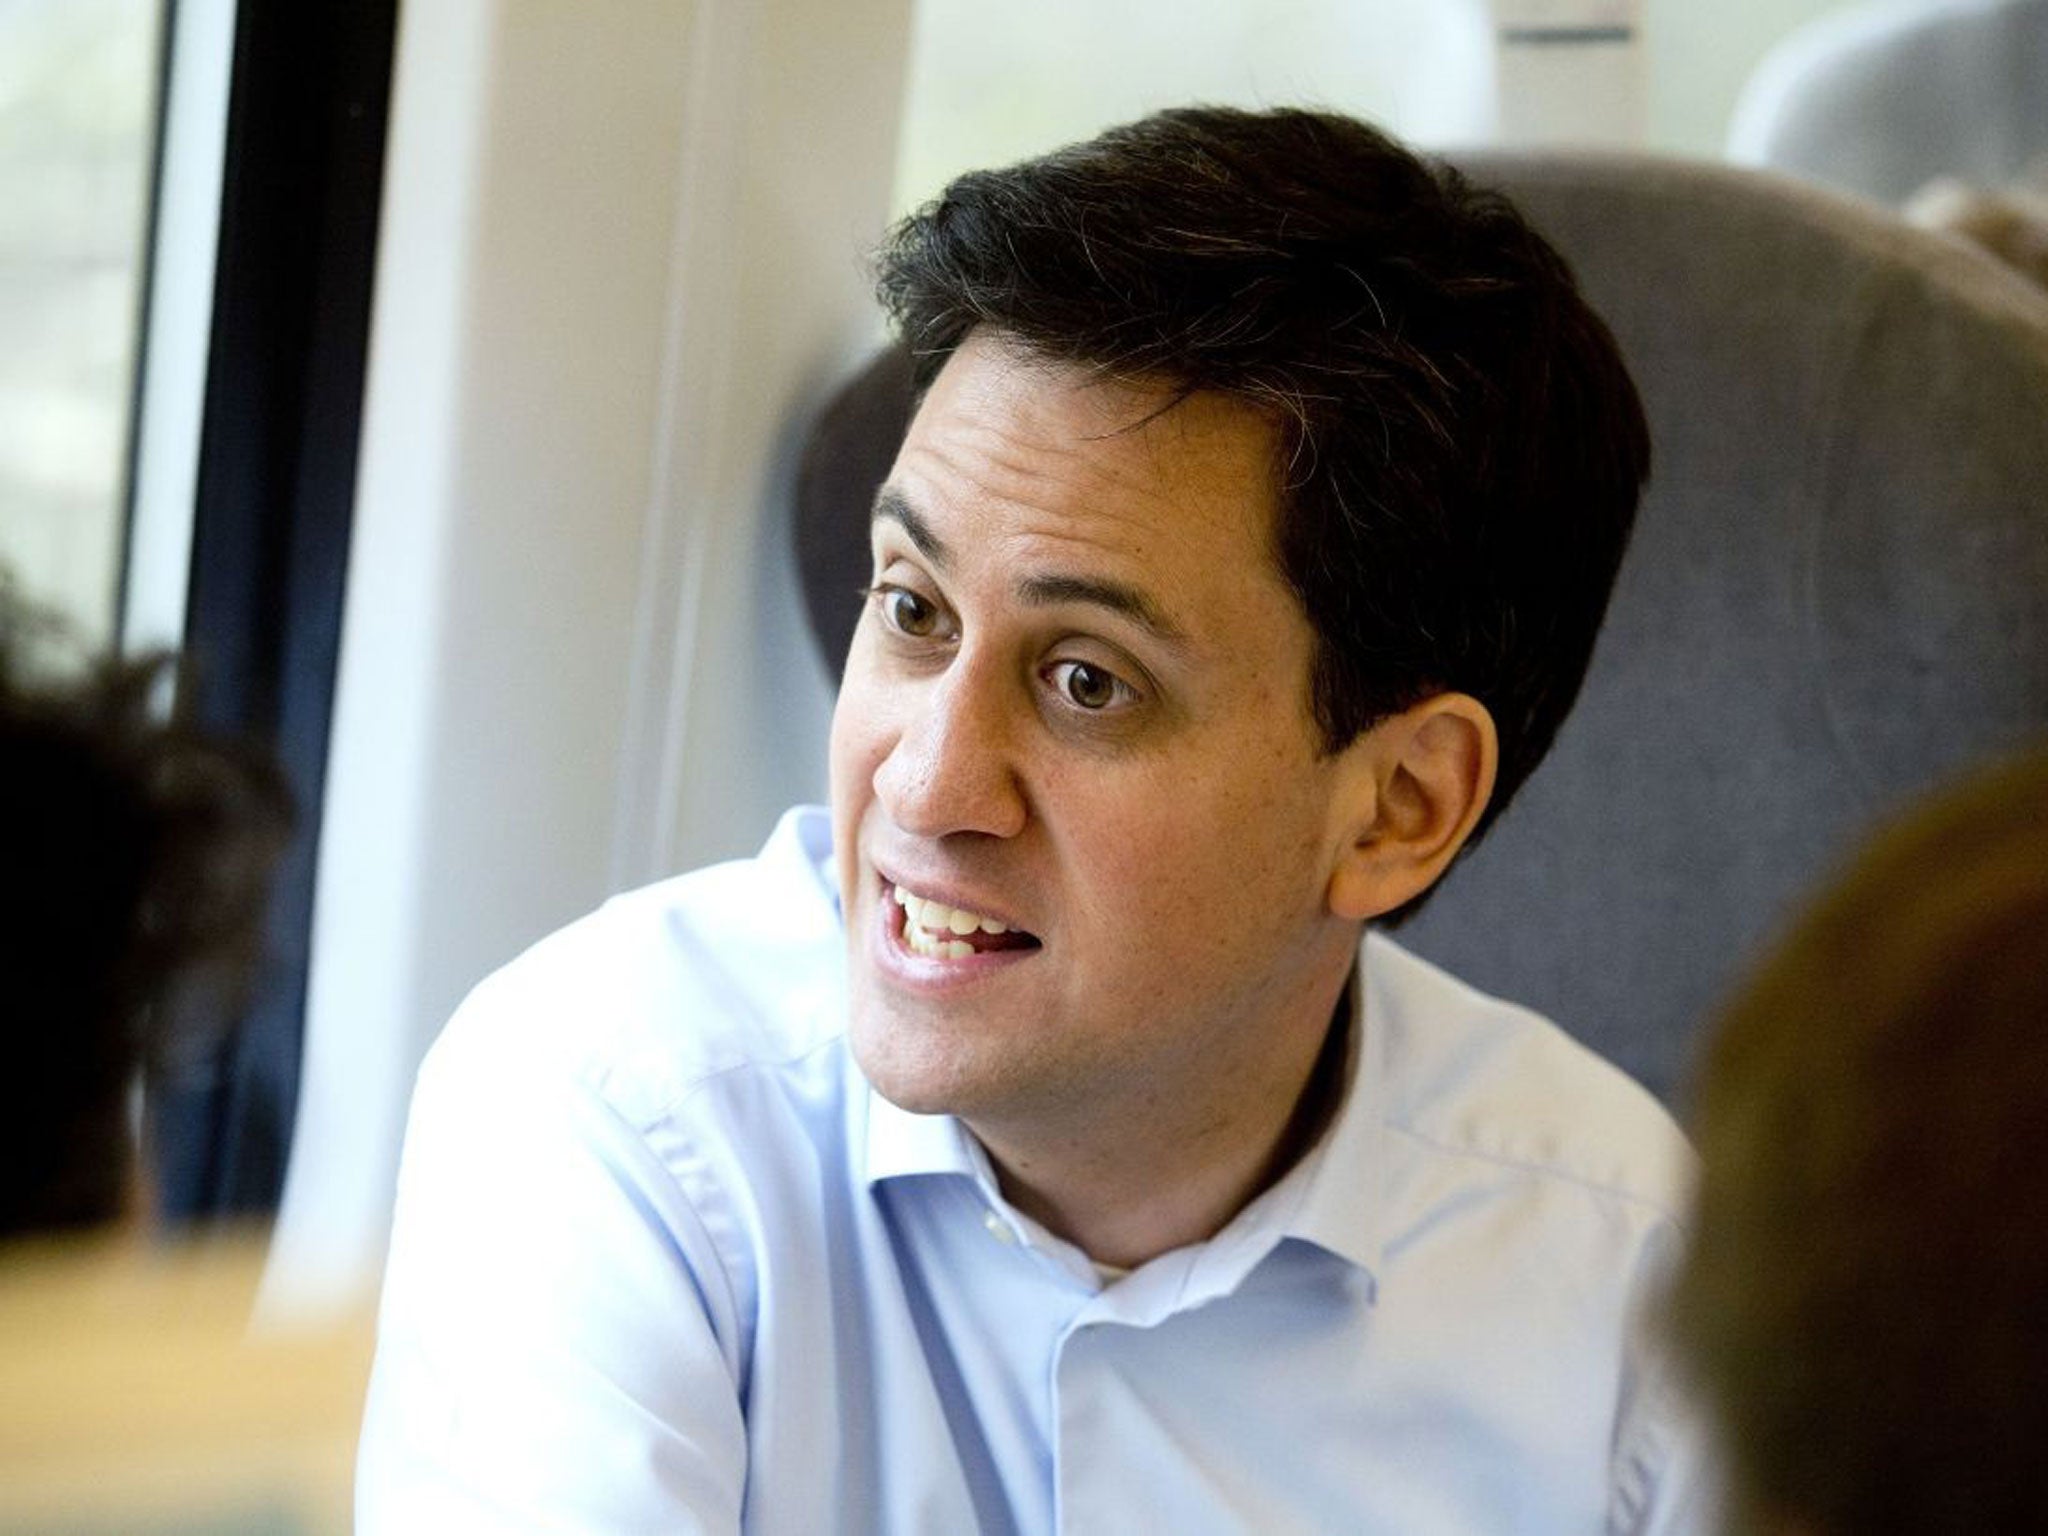 Ed Miliband has shied away from actually confronting trade unions over their connections with the Labour Party